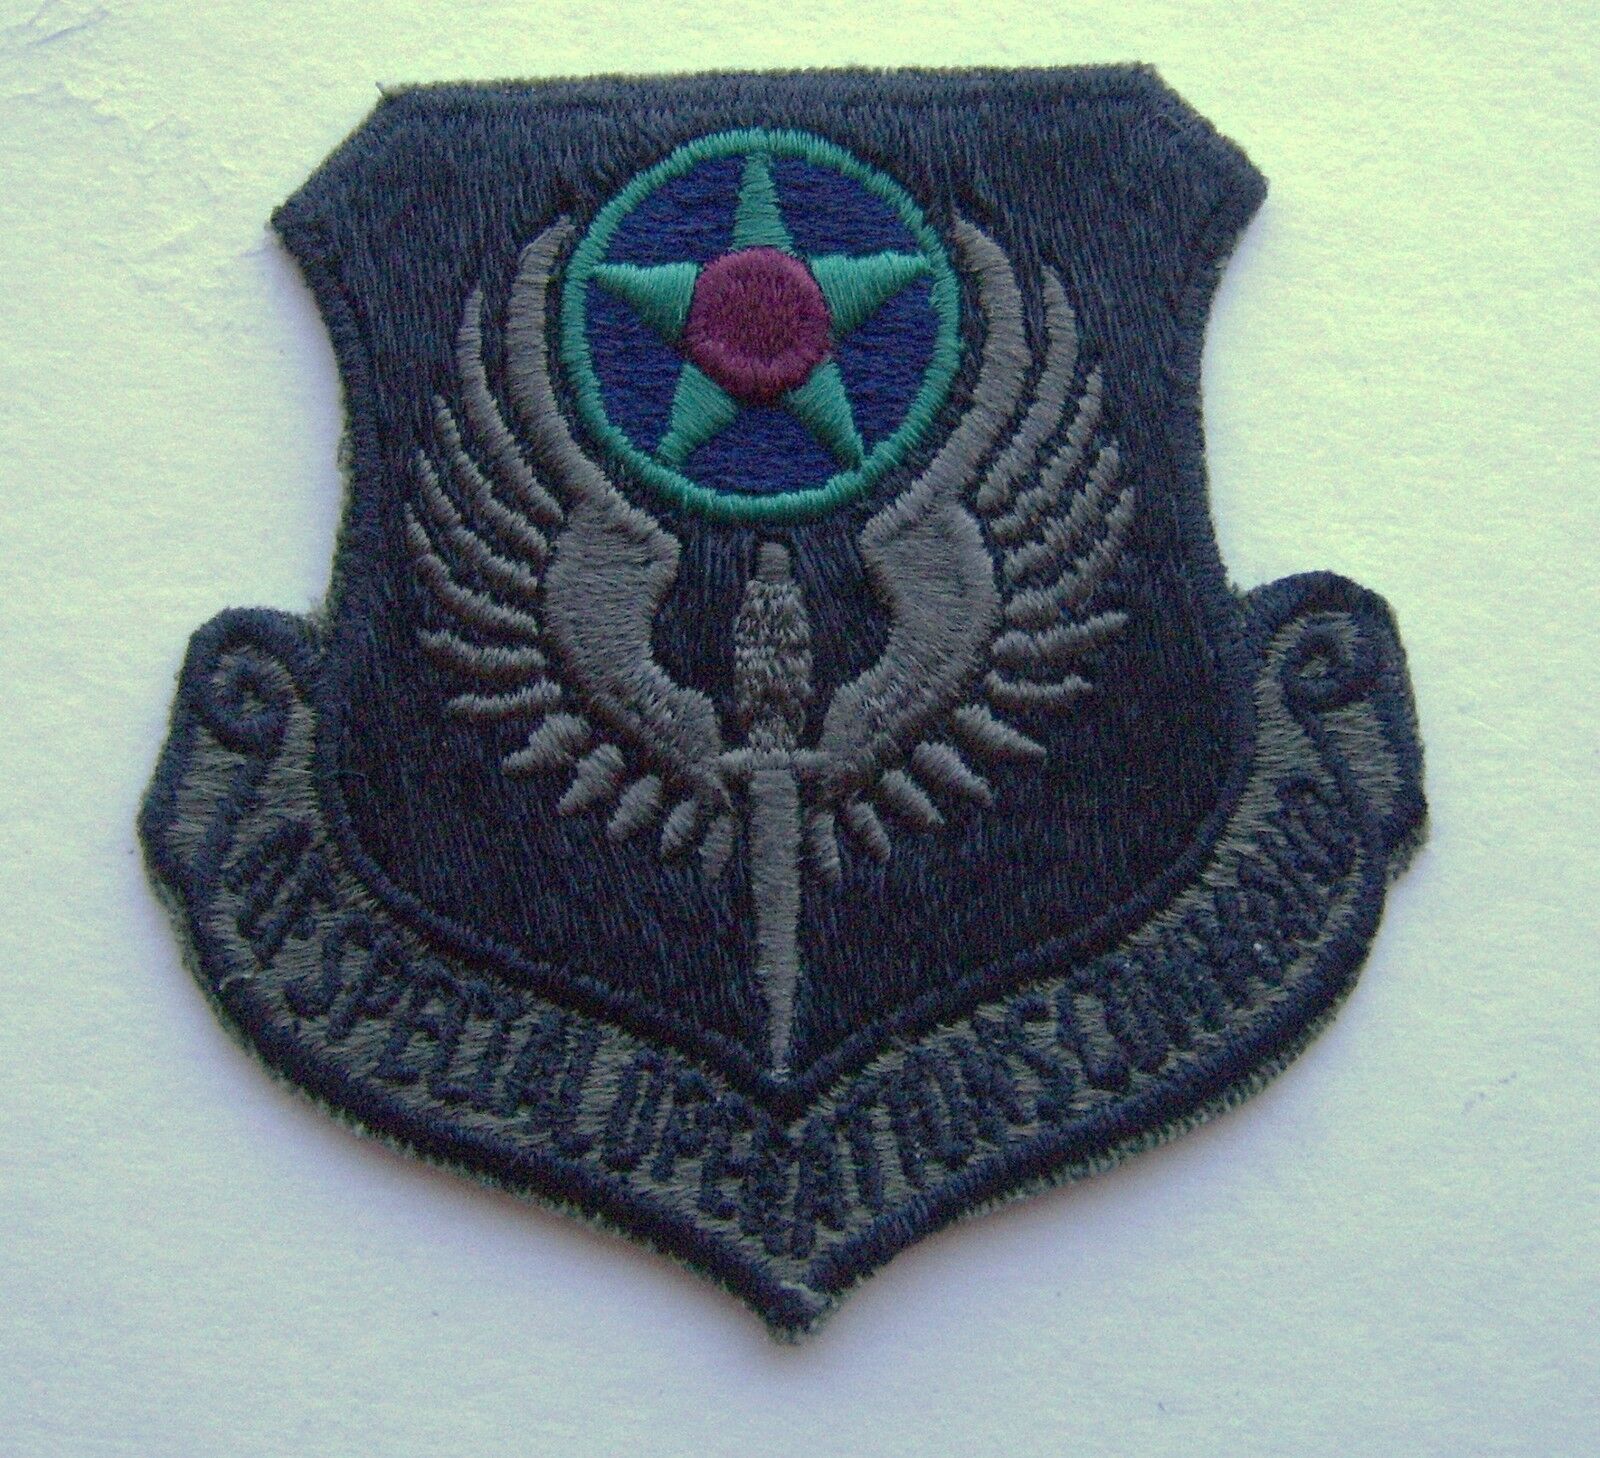 USAF SPECIAL OPERATIONS COMMAND PATCH SUBDUED SHIELD STYLE :K1